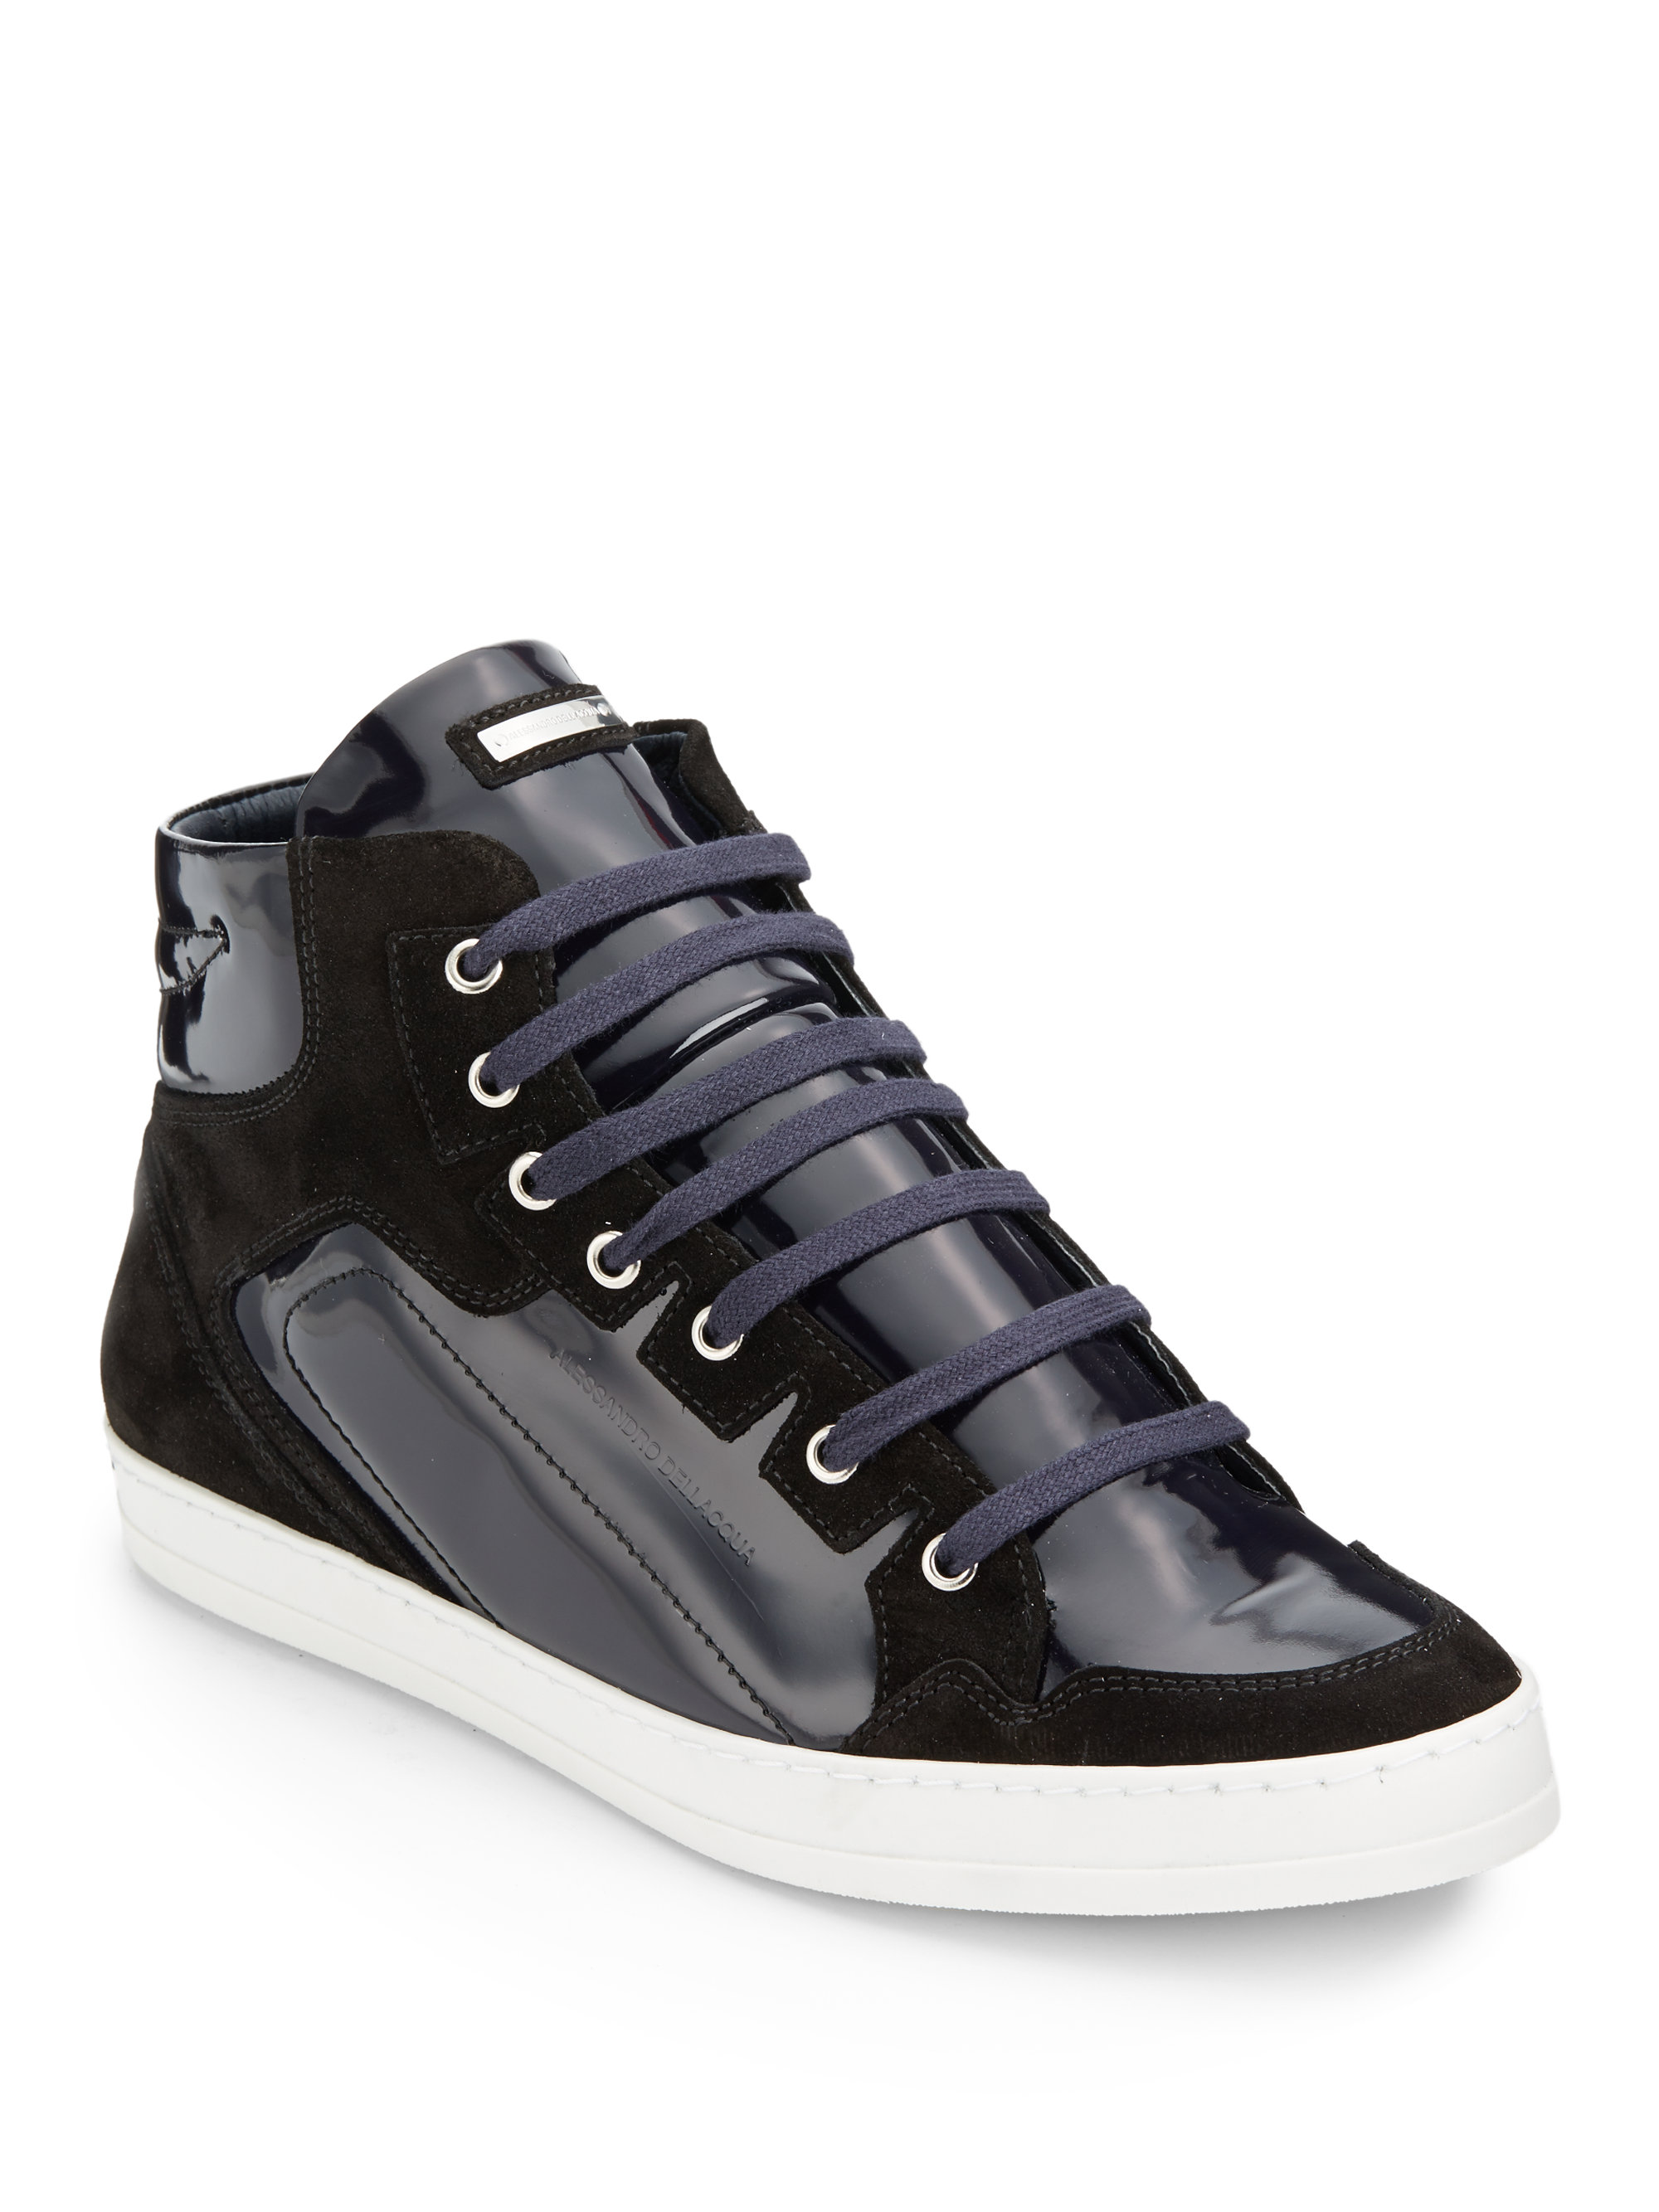 Alessandro Dell'acqua Suedetrimmed Hightop Patent Leather Sneakers in ...